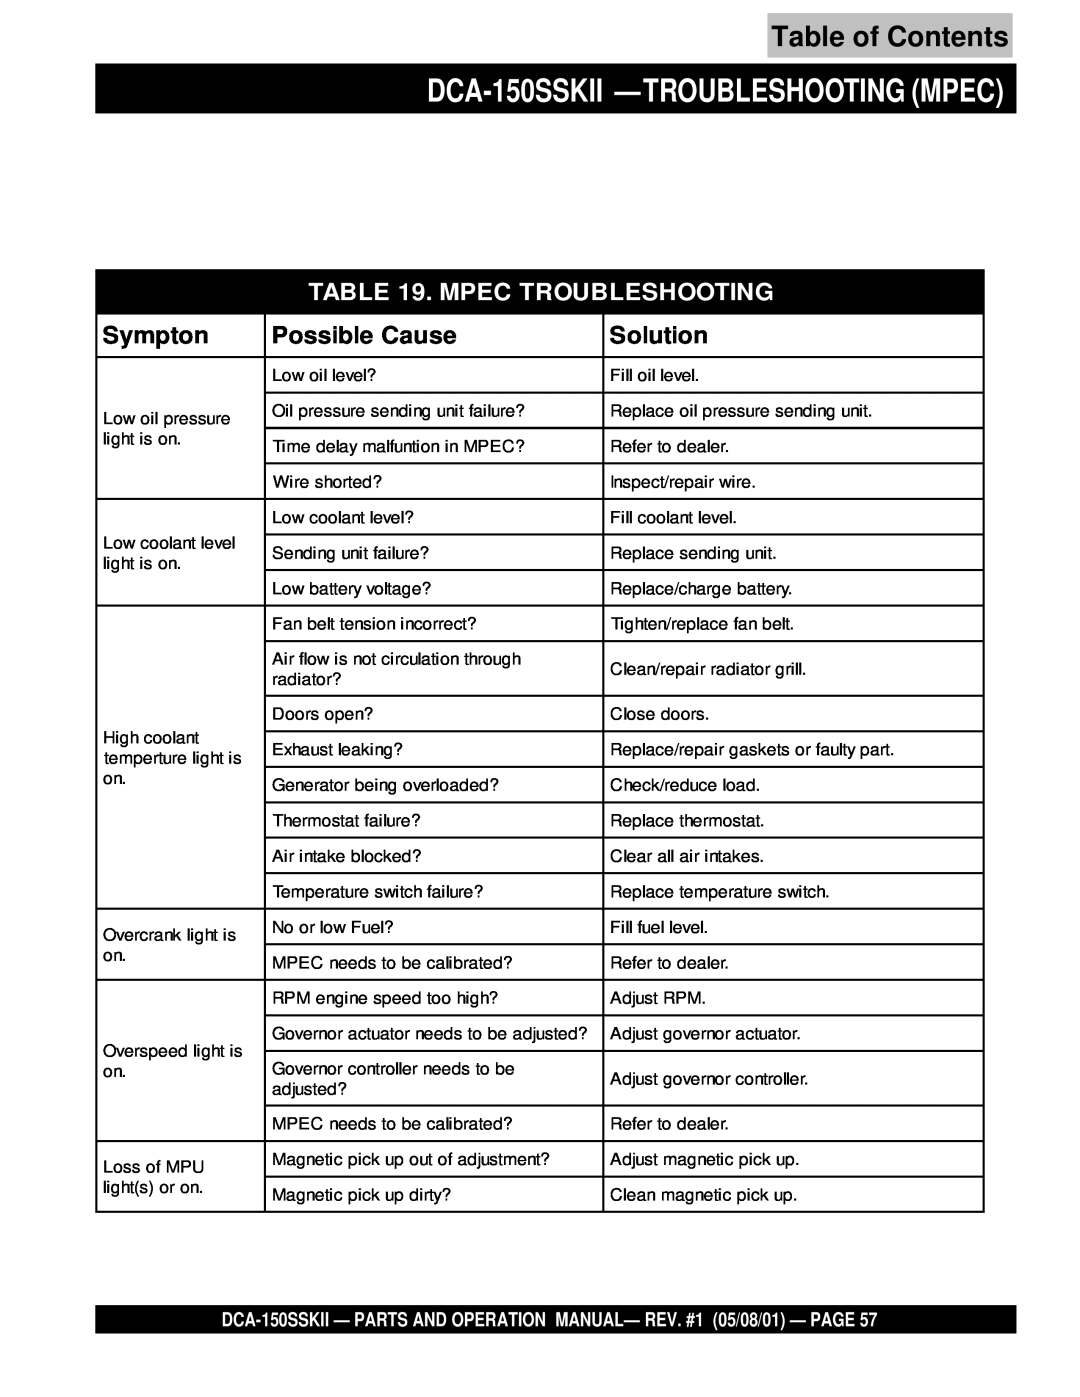 Multiquip DCA-150SSKII -TROUBLESHOOTING MPEC, Mpec Troubleshooting, Table of Contents, Sympton, Possible Cause 